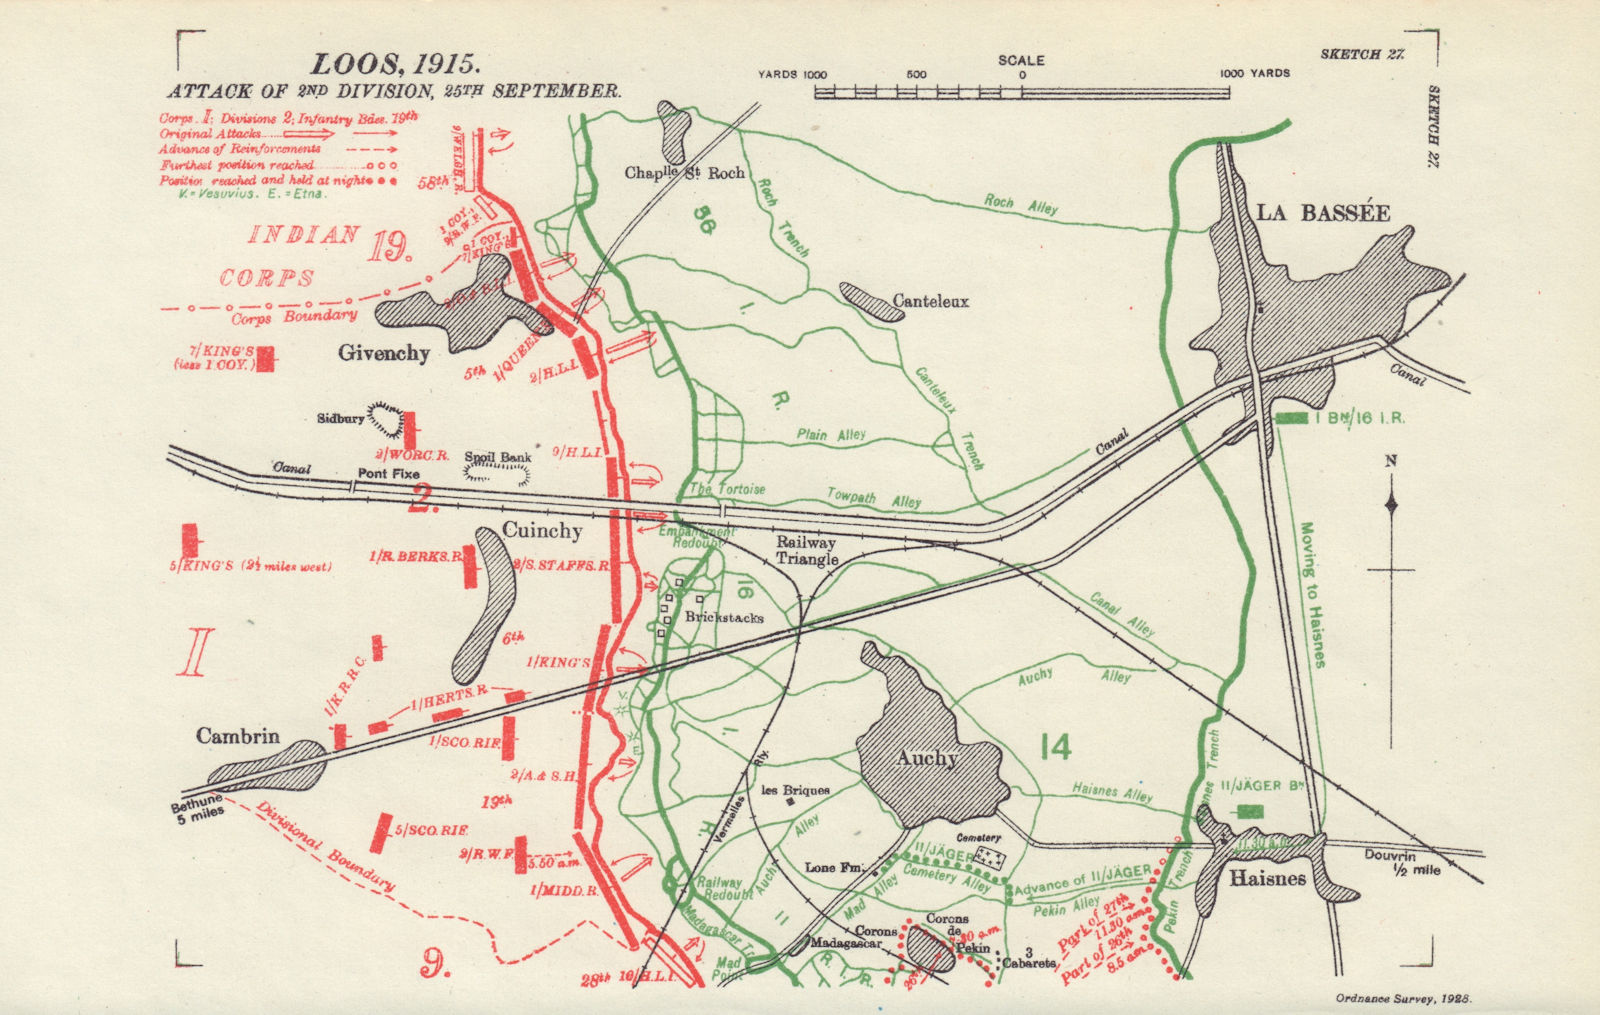 Battle of Loos, 2nd Division attack, 25th September 1915. WW1. Trenches 1928 map